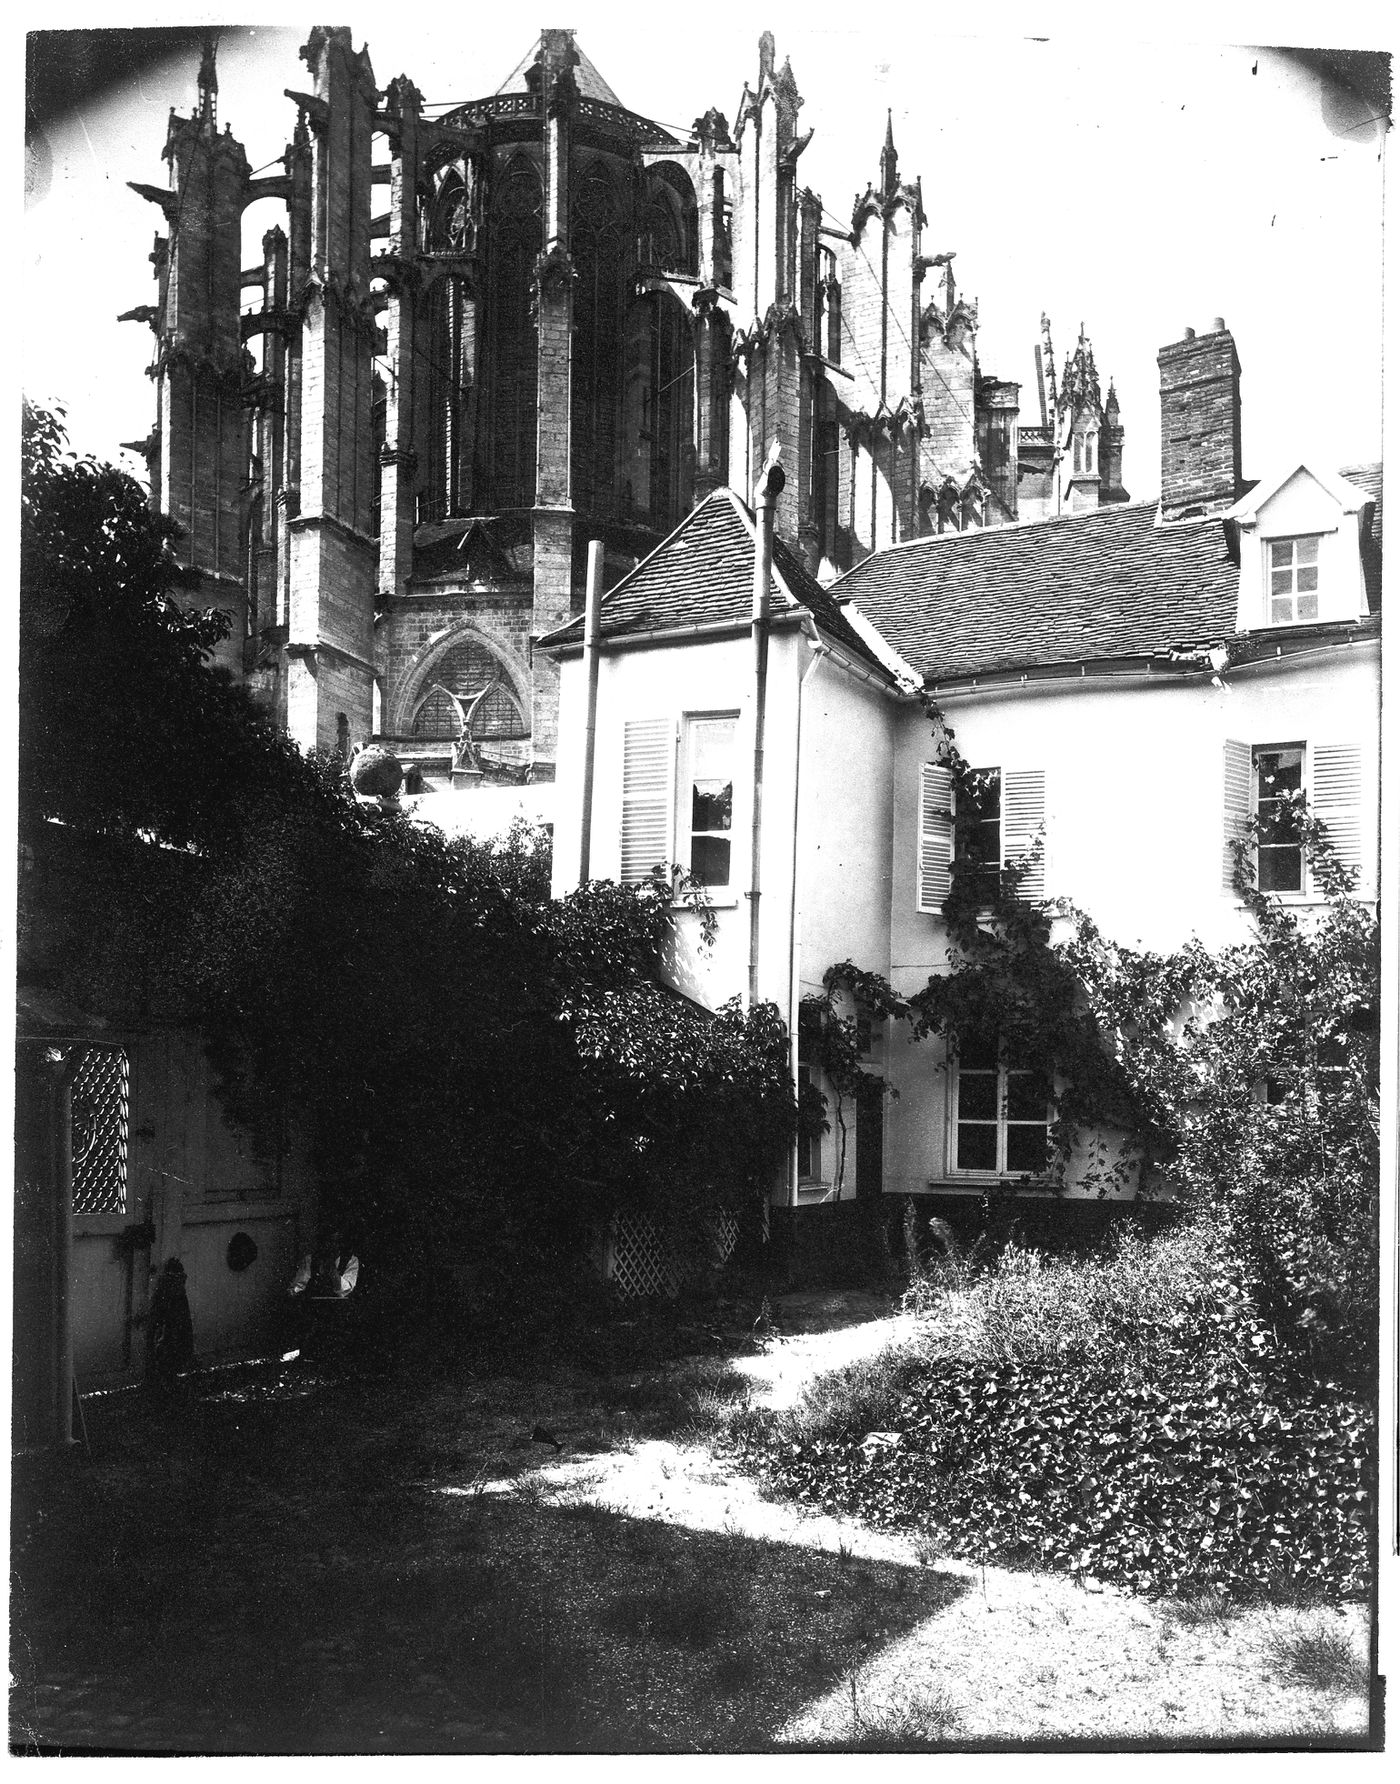 Rue de Sable Gelée, house and garden with Beauvais cathedral in background, Beauvais, France